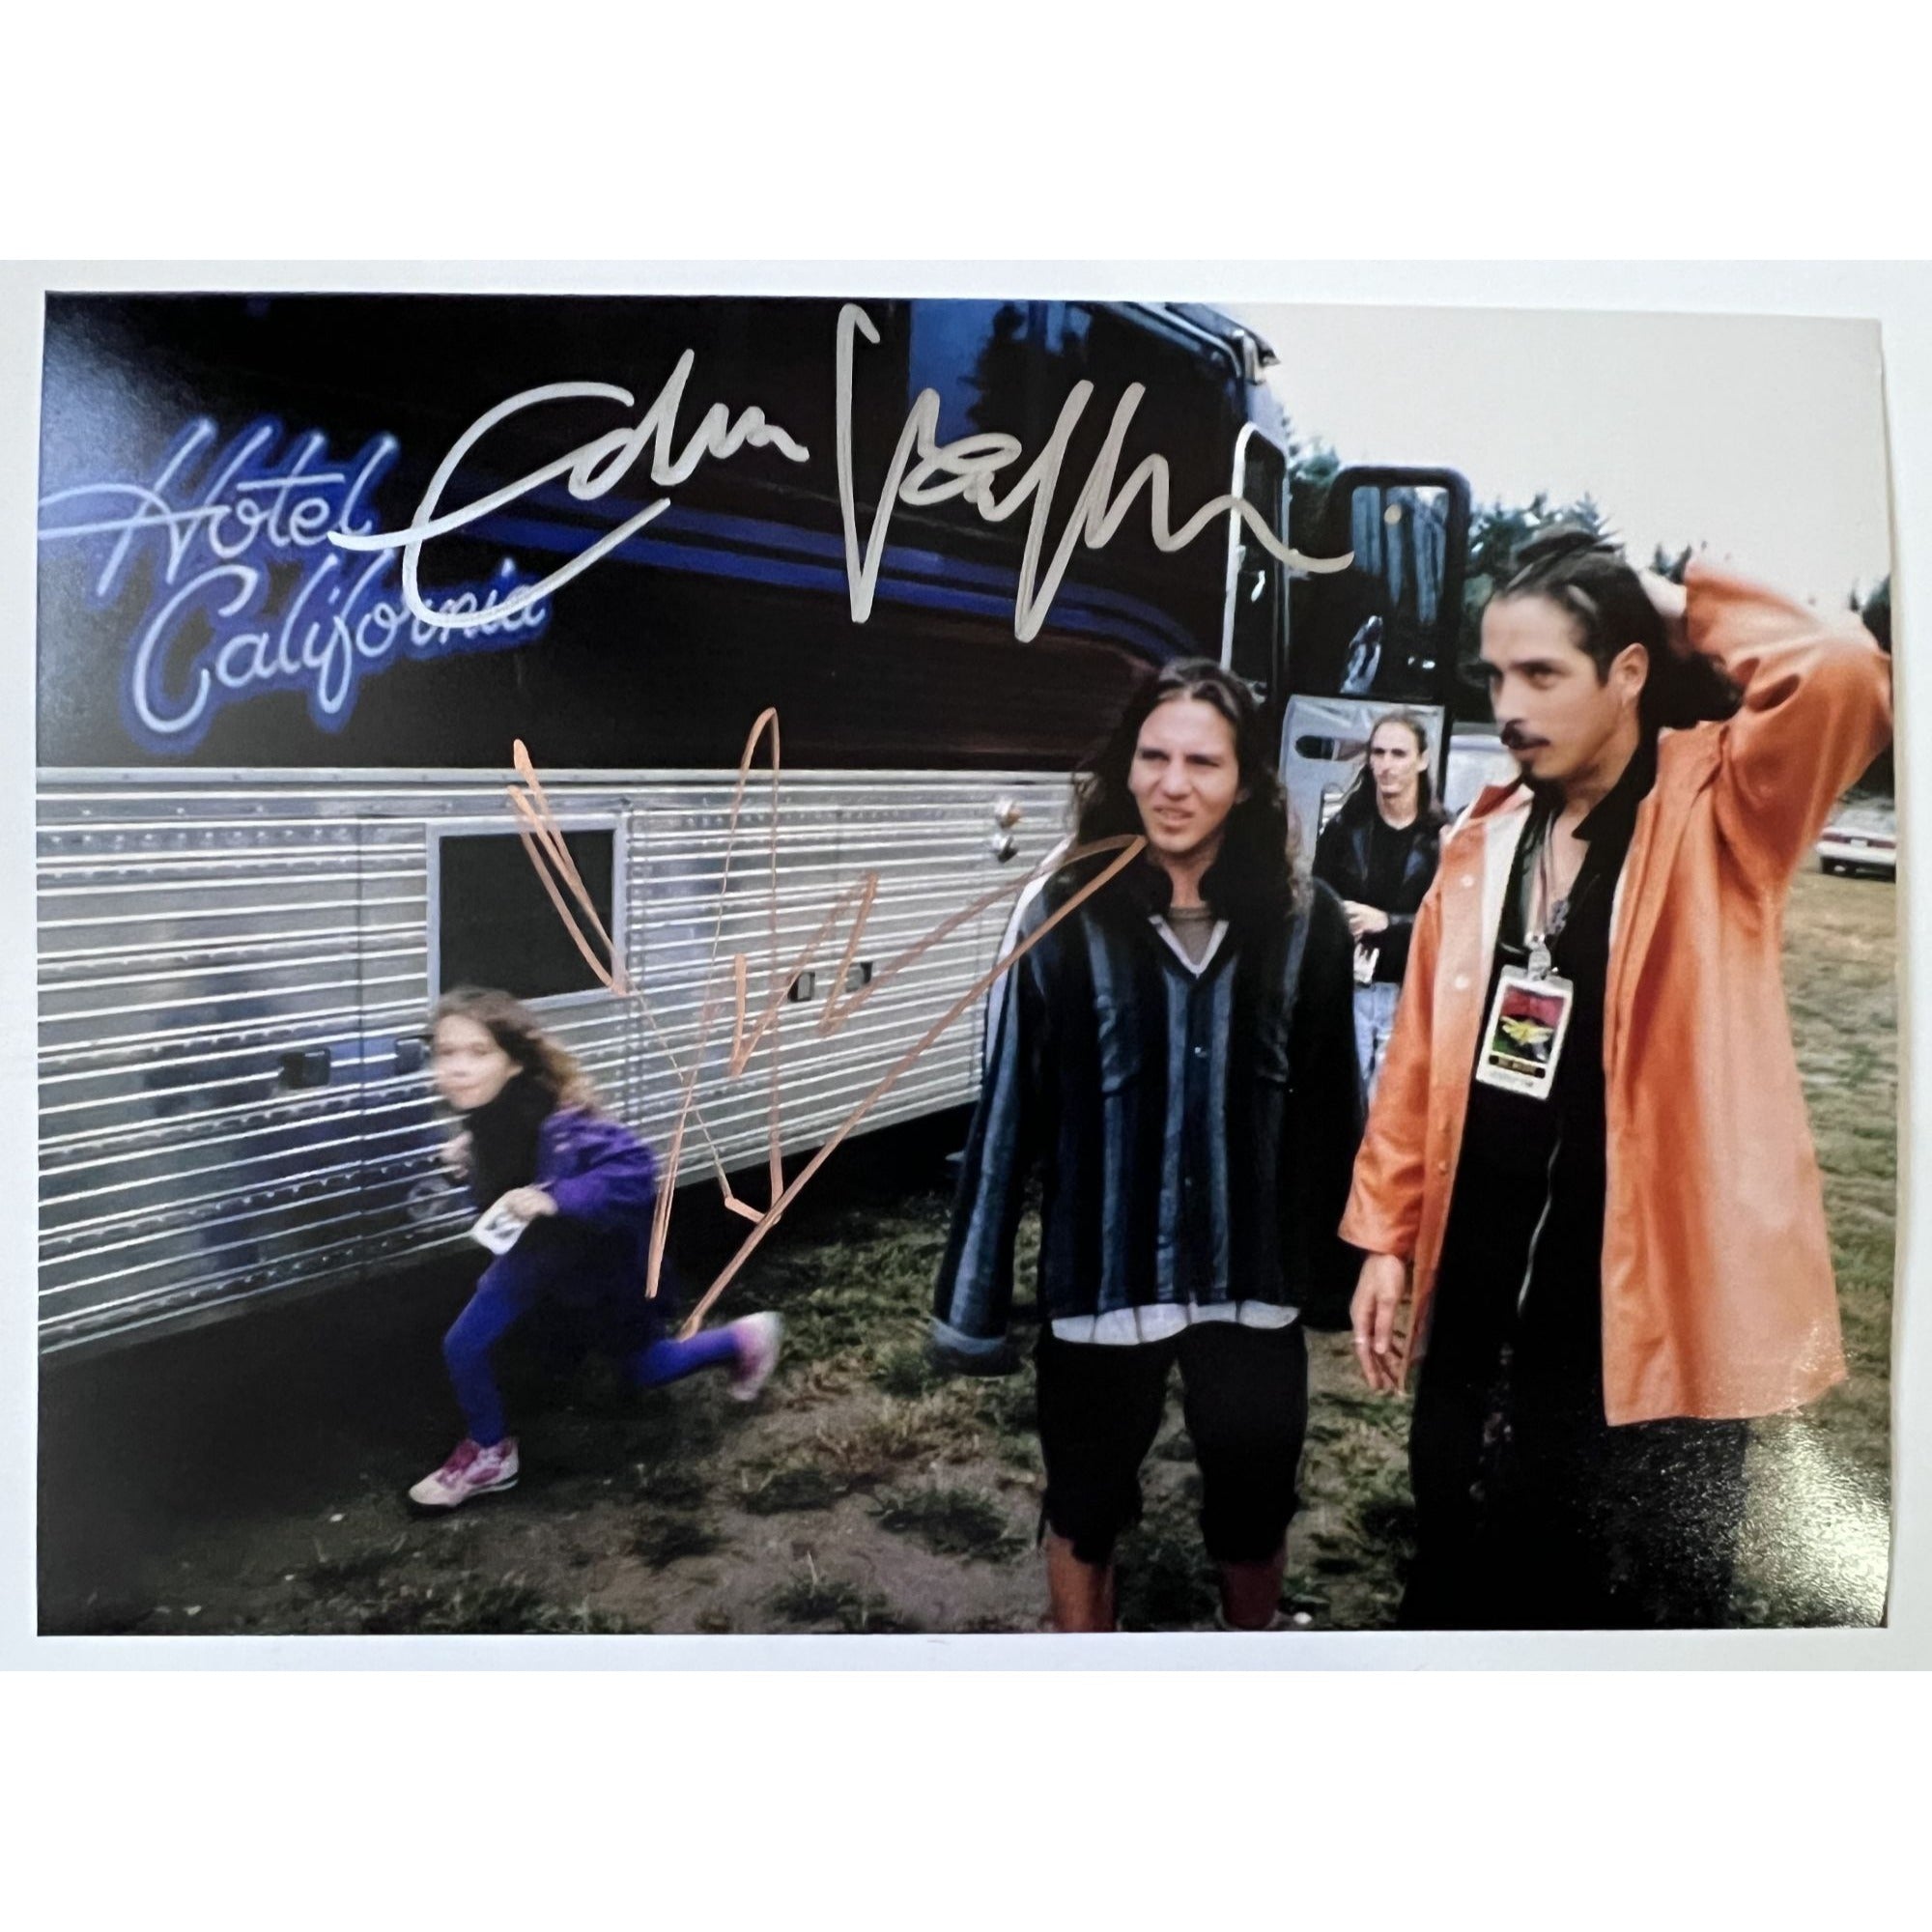 Eddie Vedder Pearl Jam Chris Cornell Soundgarden 5x7 photo signed with proof